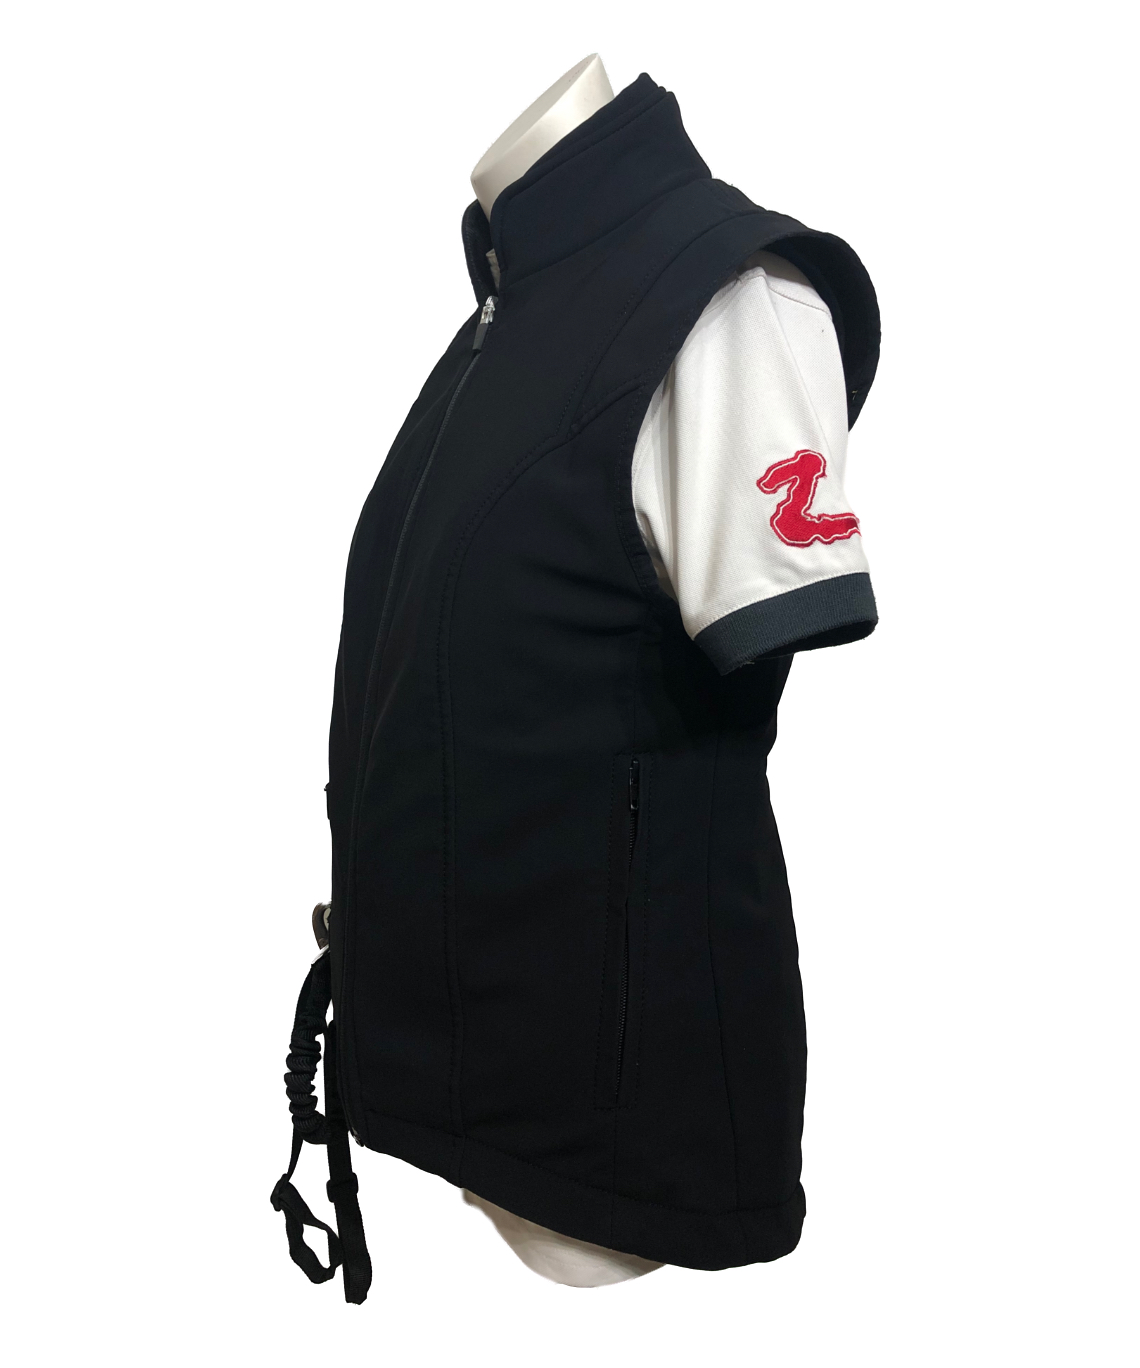 RHW3002266 ZipIn 1 with Airshell Vest Black Small Side